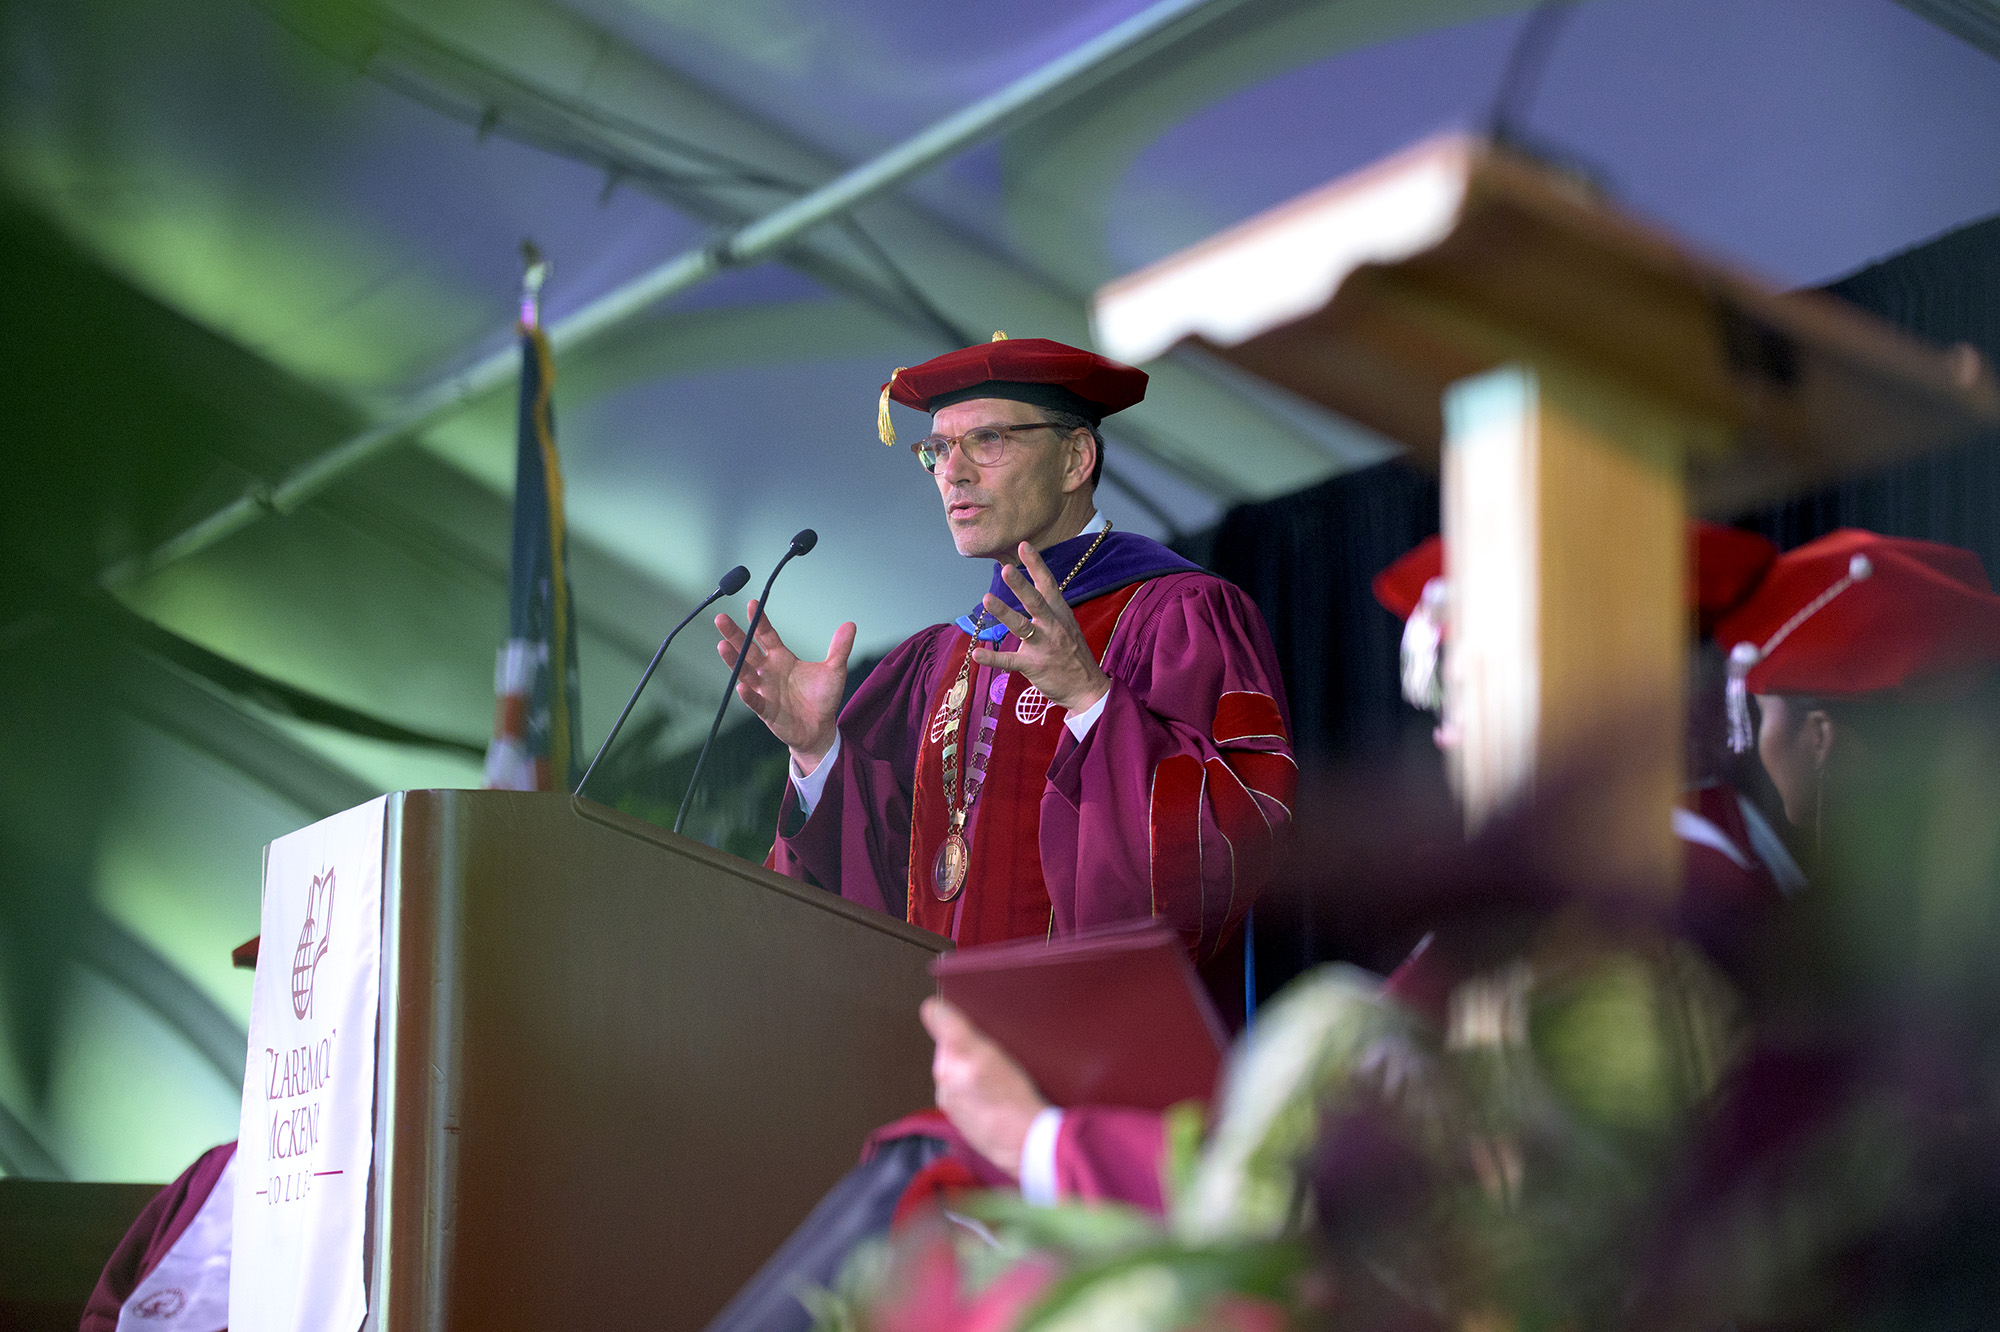 President Chodosh at the podium during CMC's 2022 Commencement.